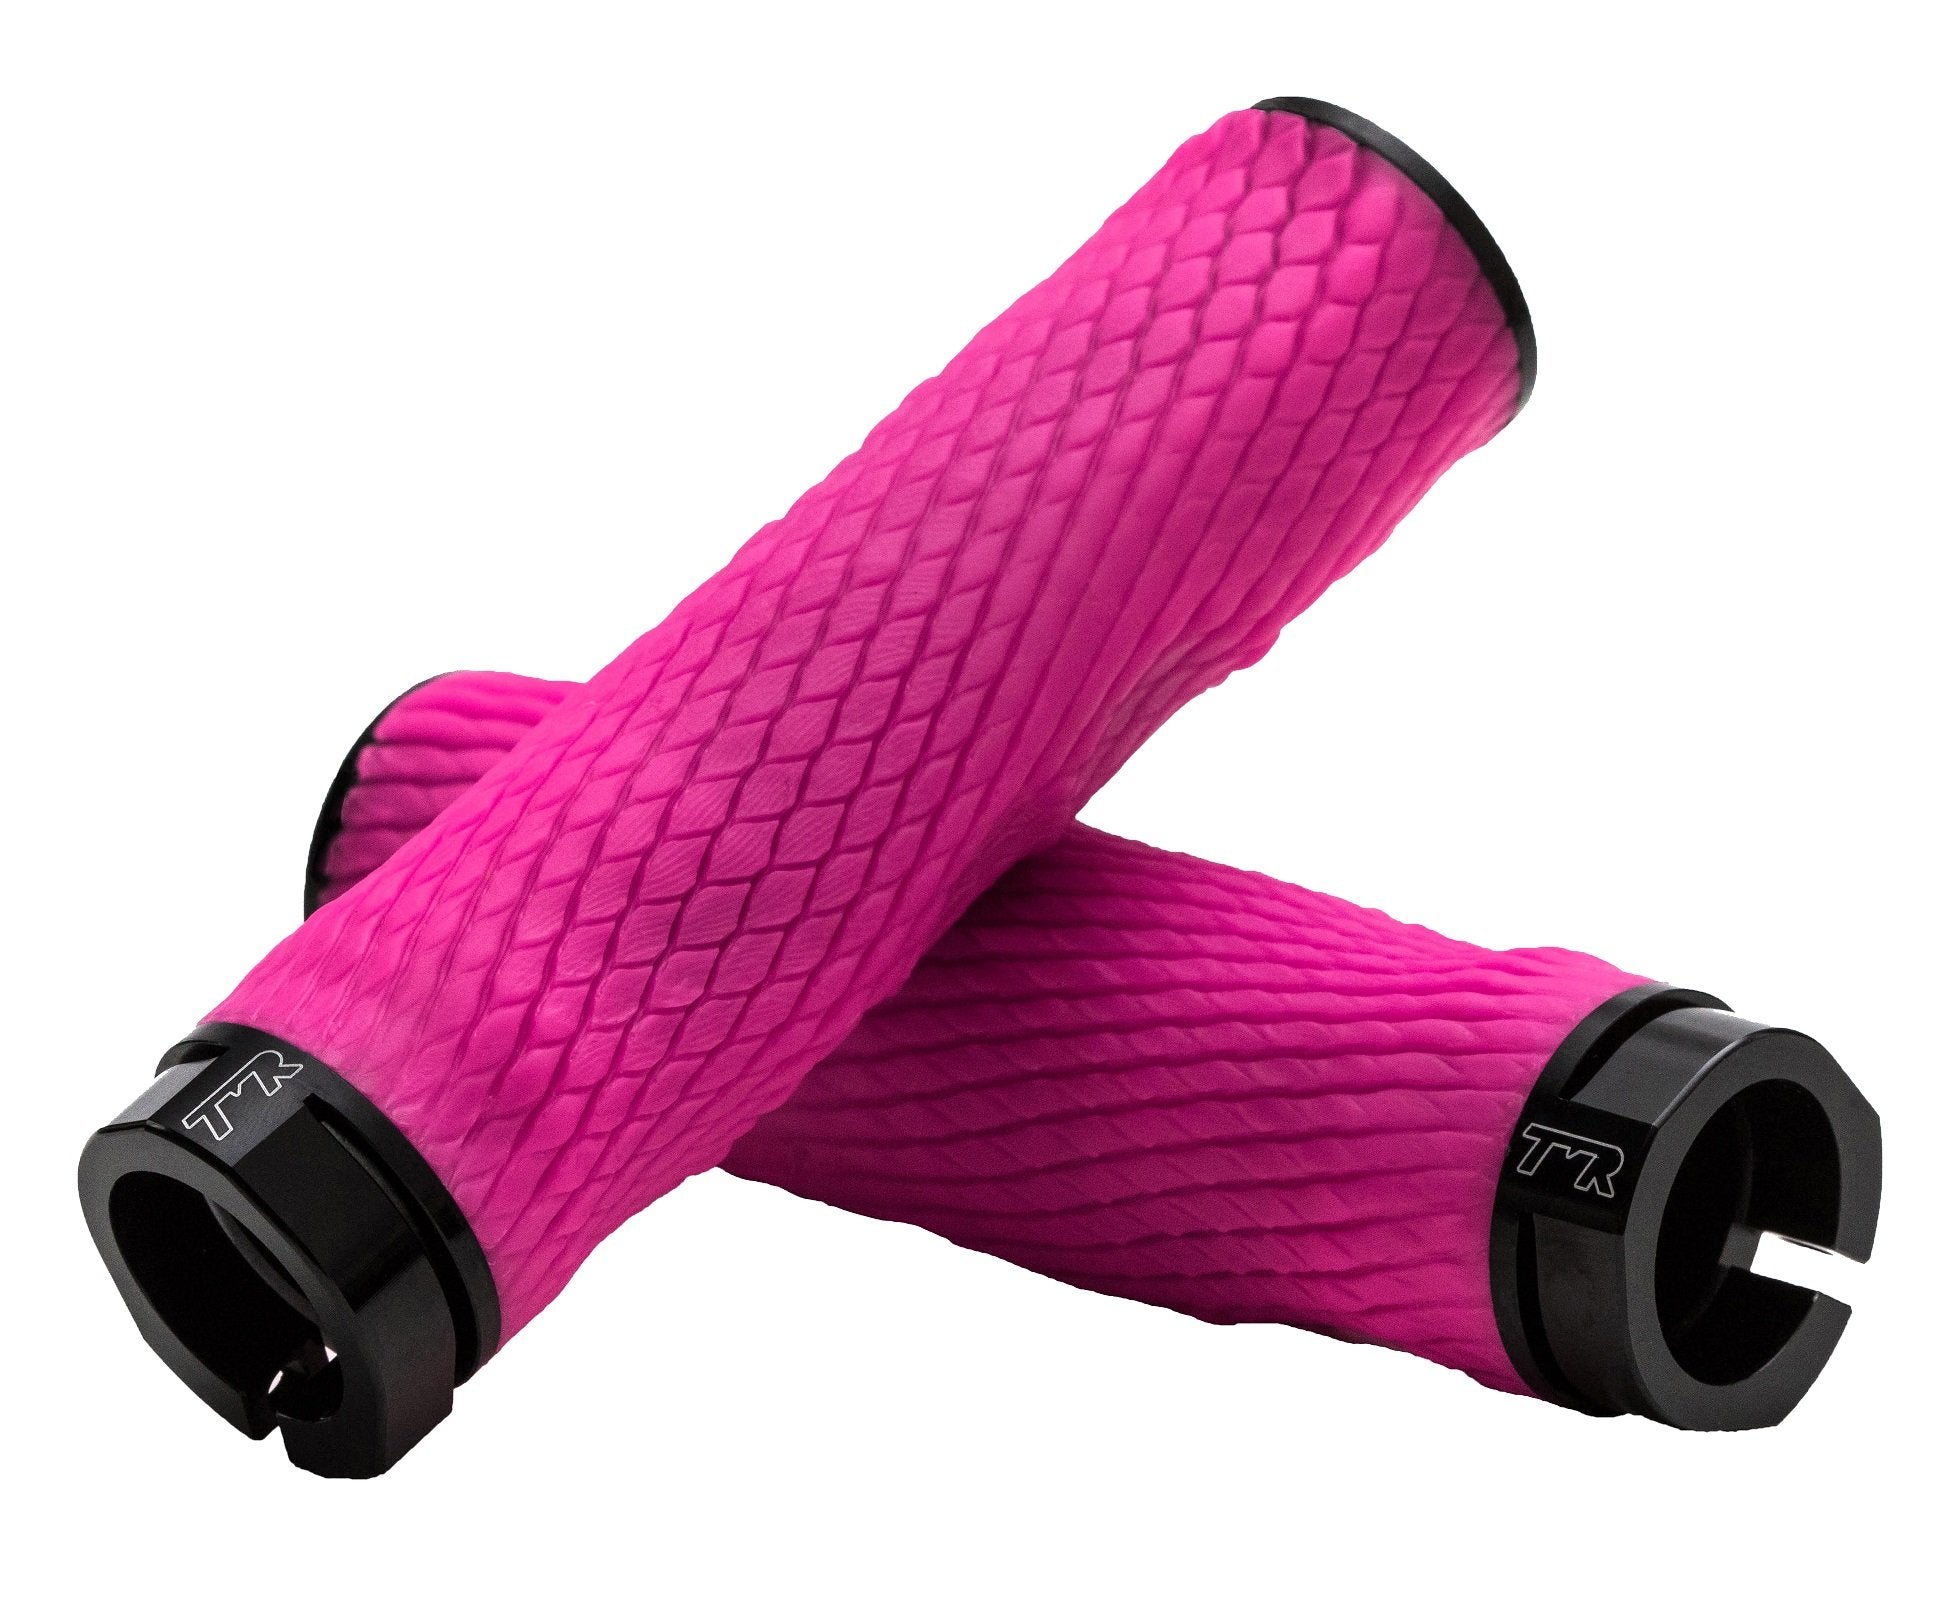 PRO Imprint Grips Custom Mouldable Lock-On Grips - Hot Pink